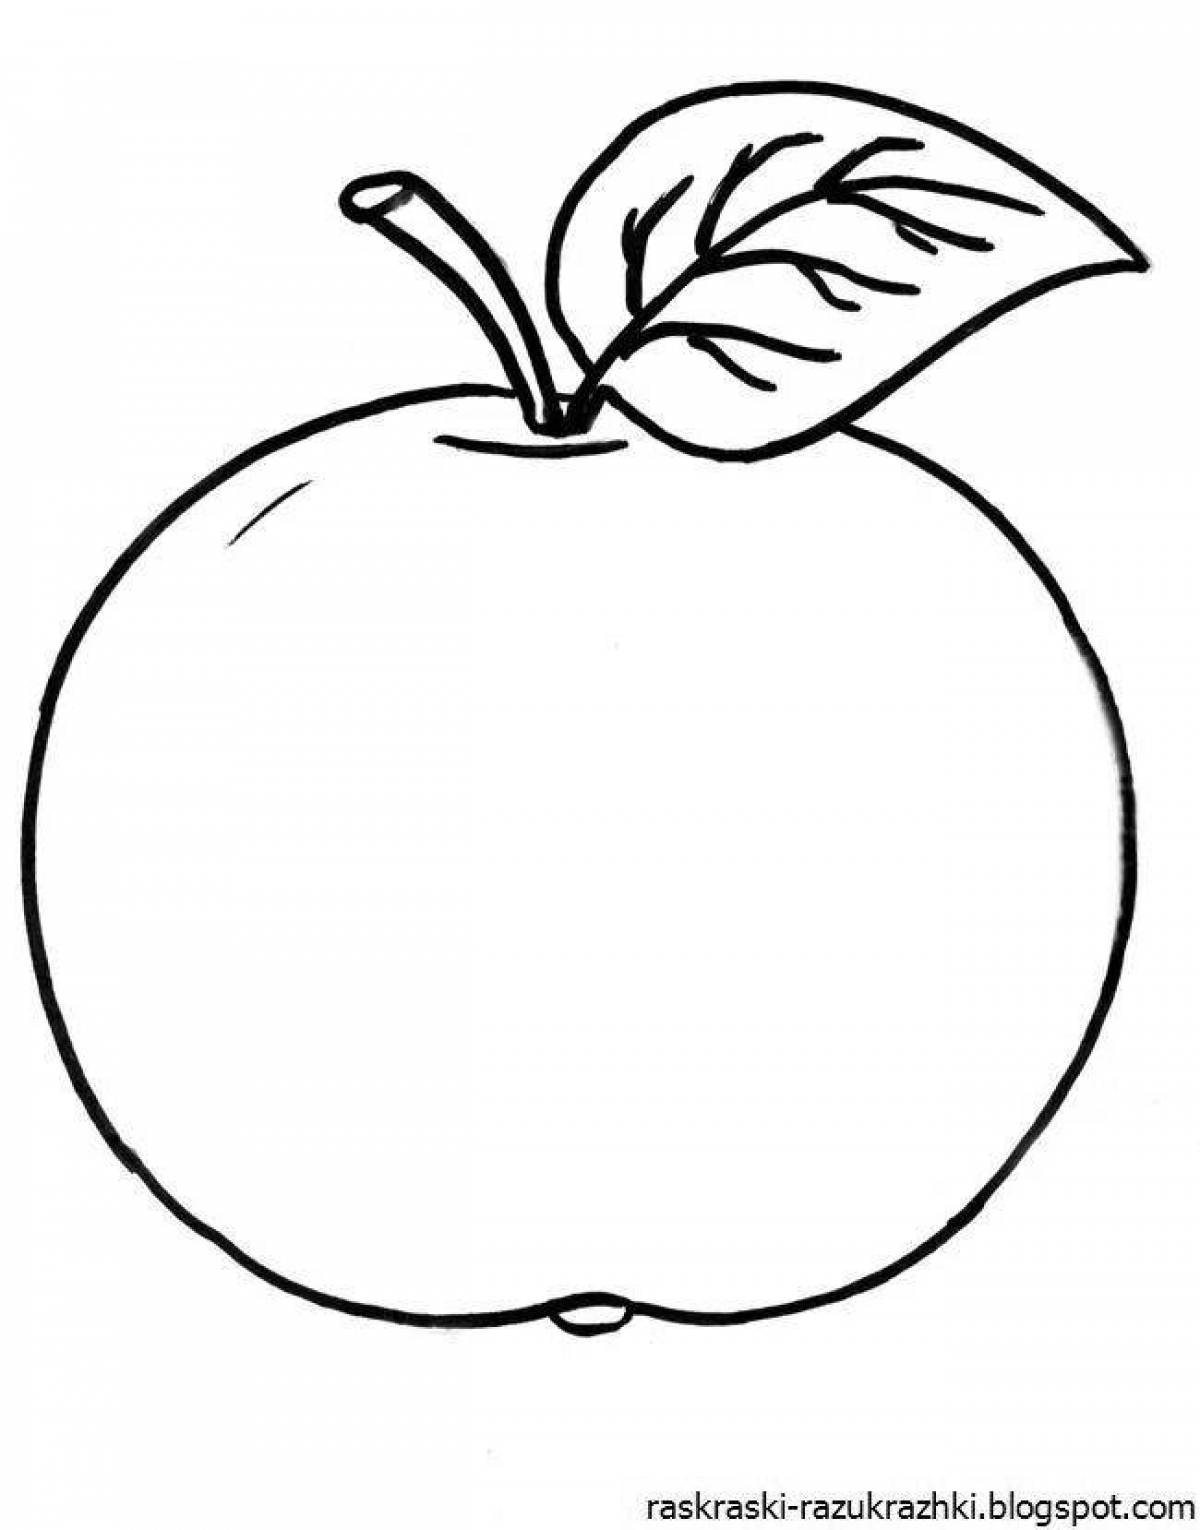 Delightful drawing of an apple